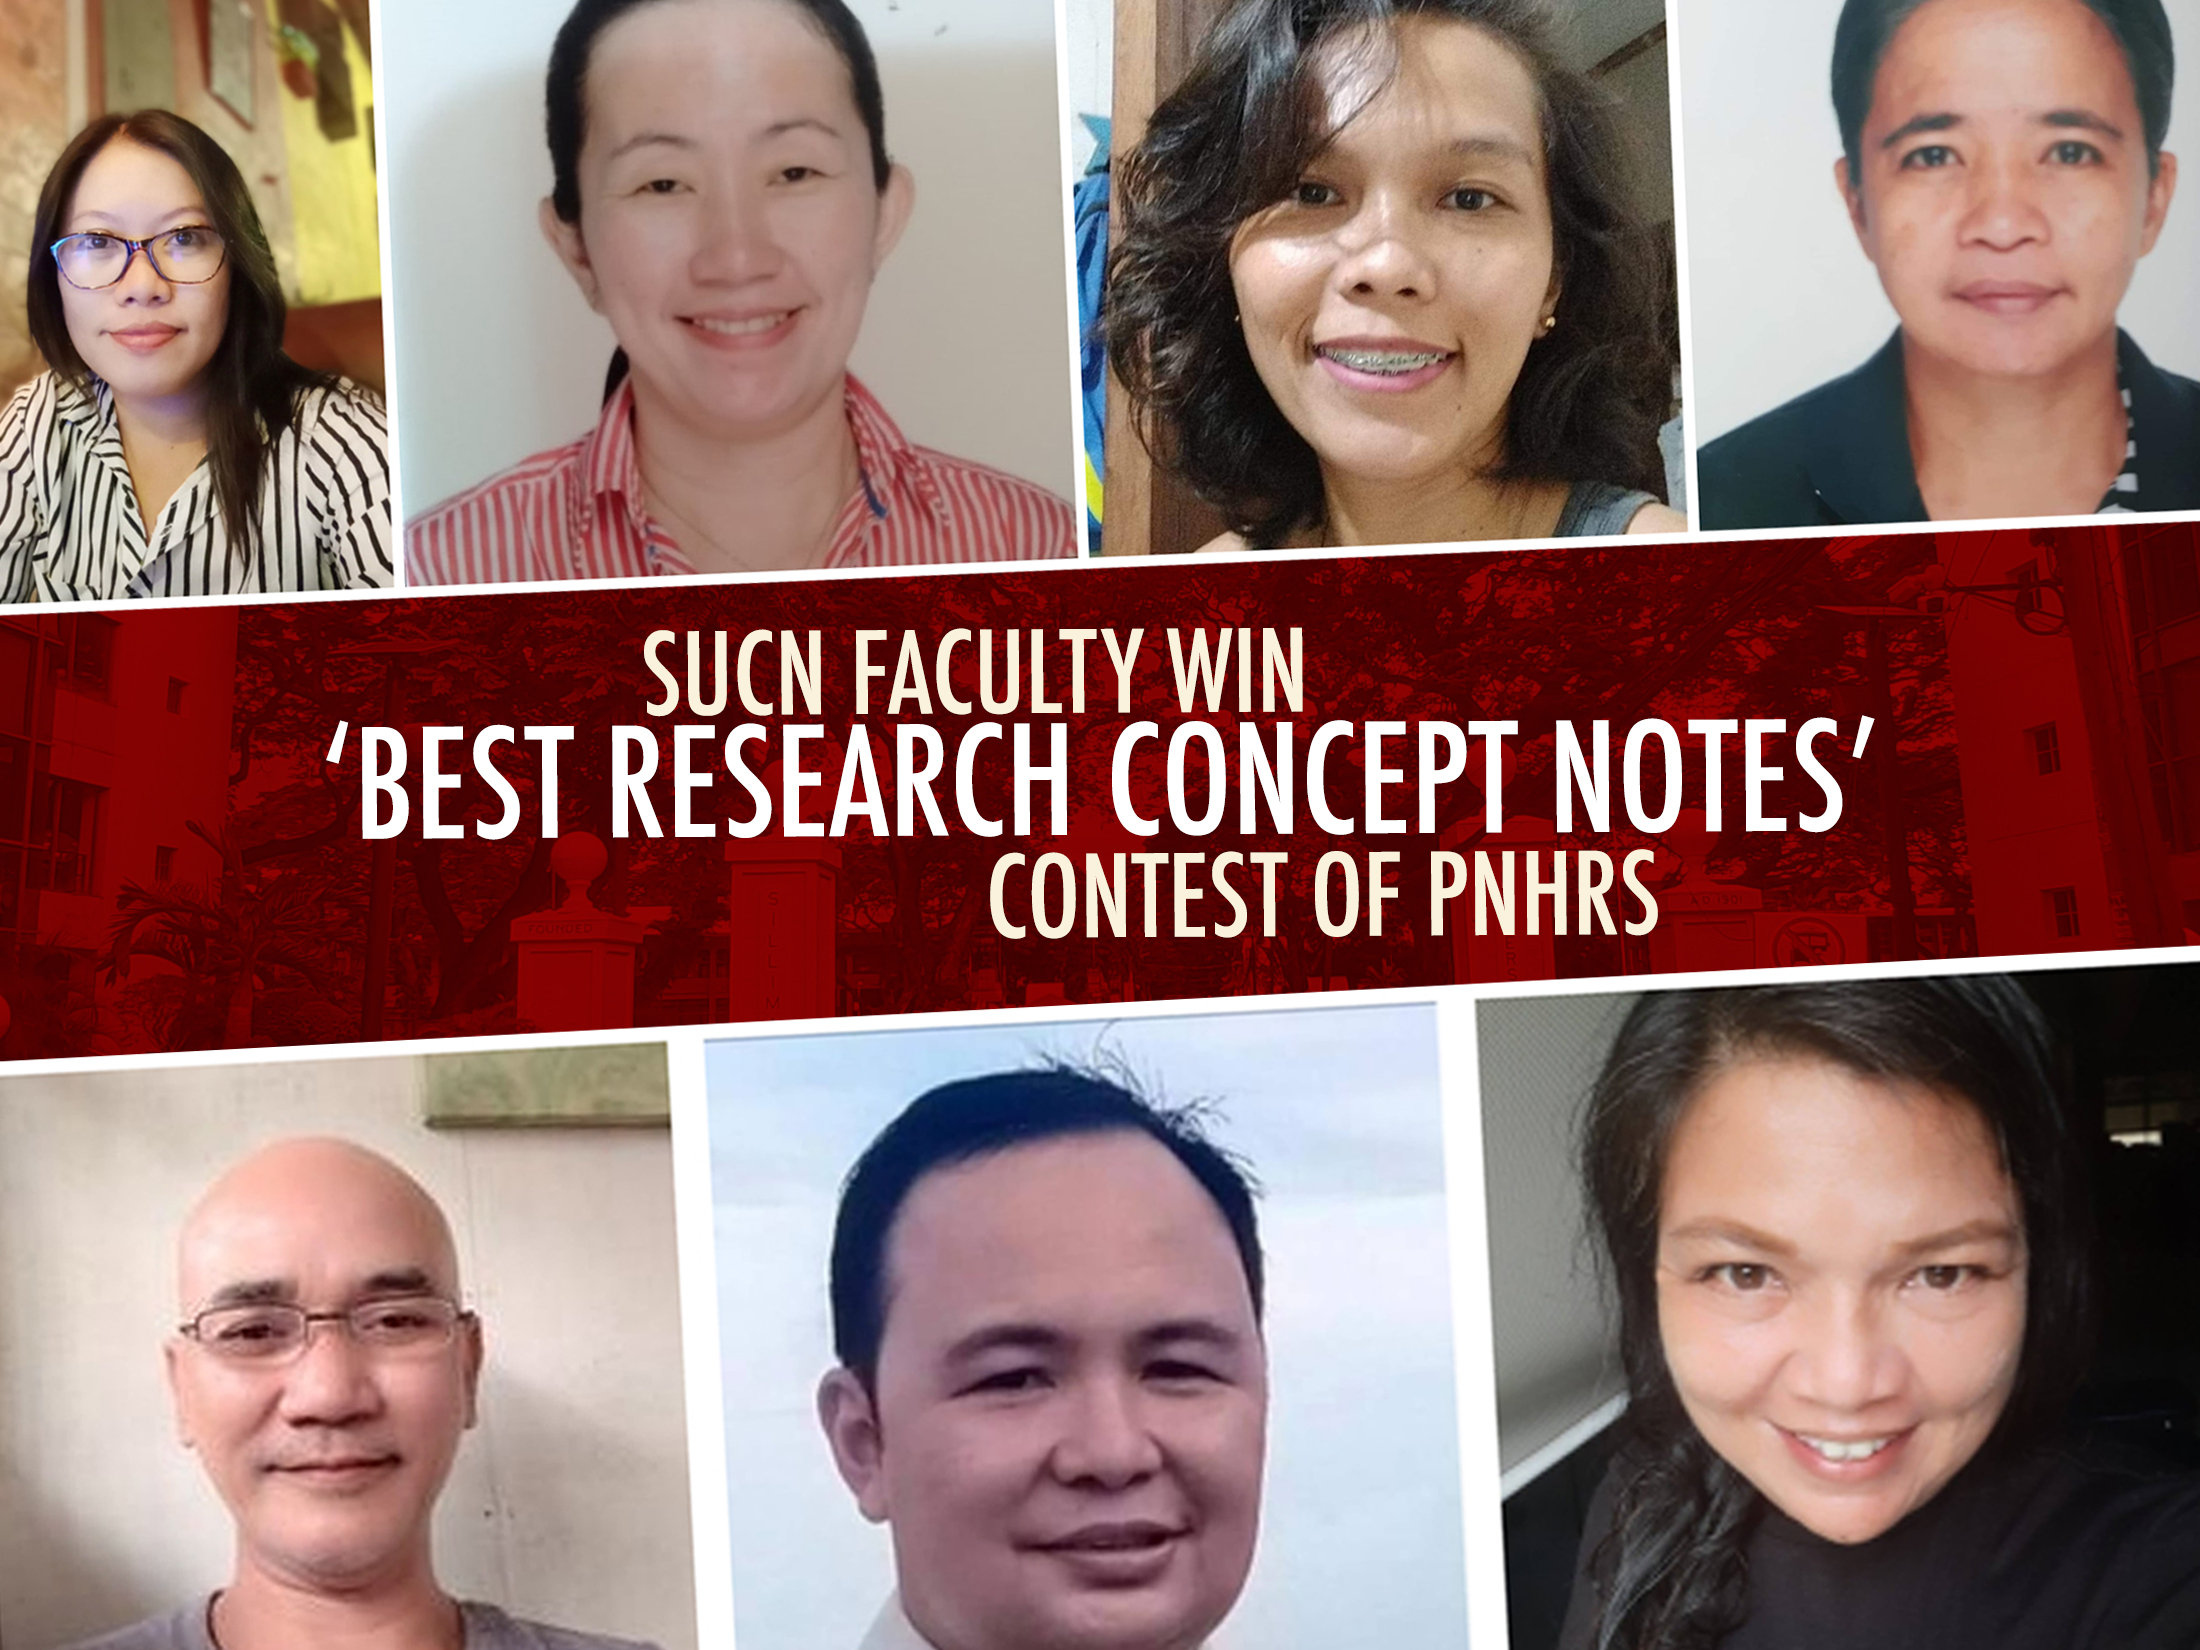 SUCN faculty win ‘Best Research Concept Notes’ contest of PNHRS